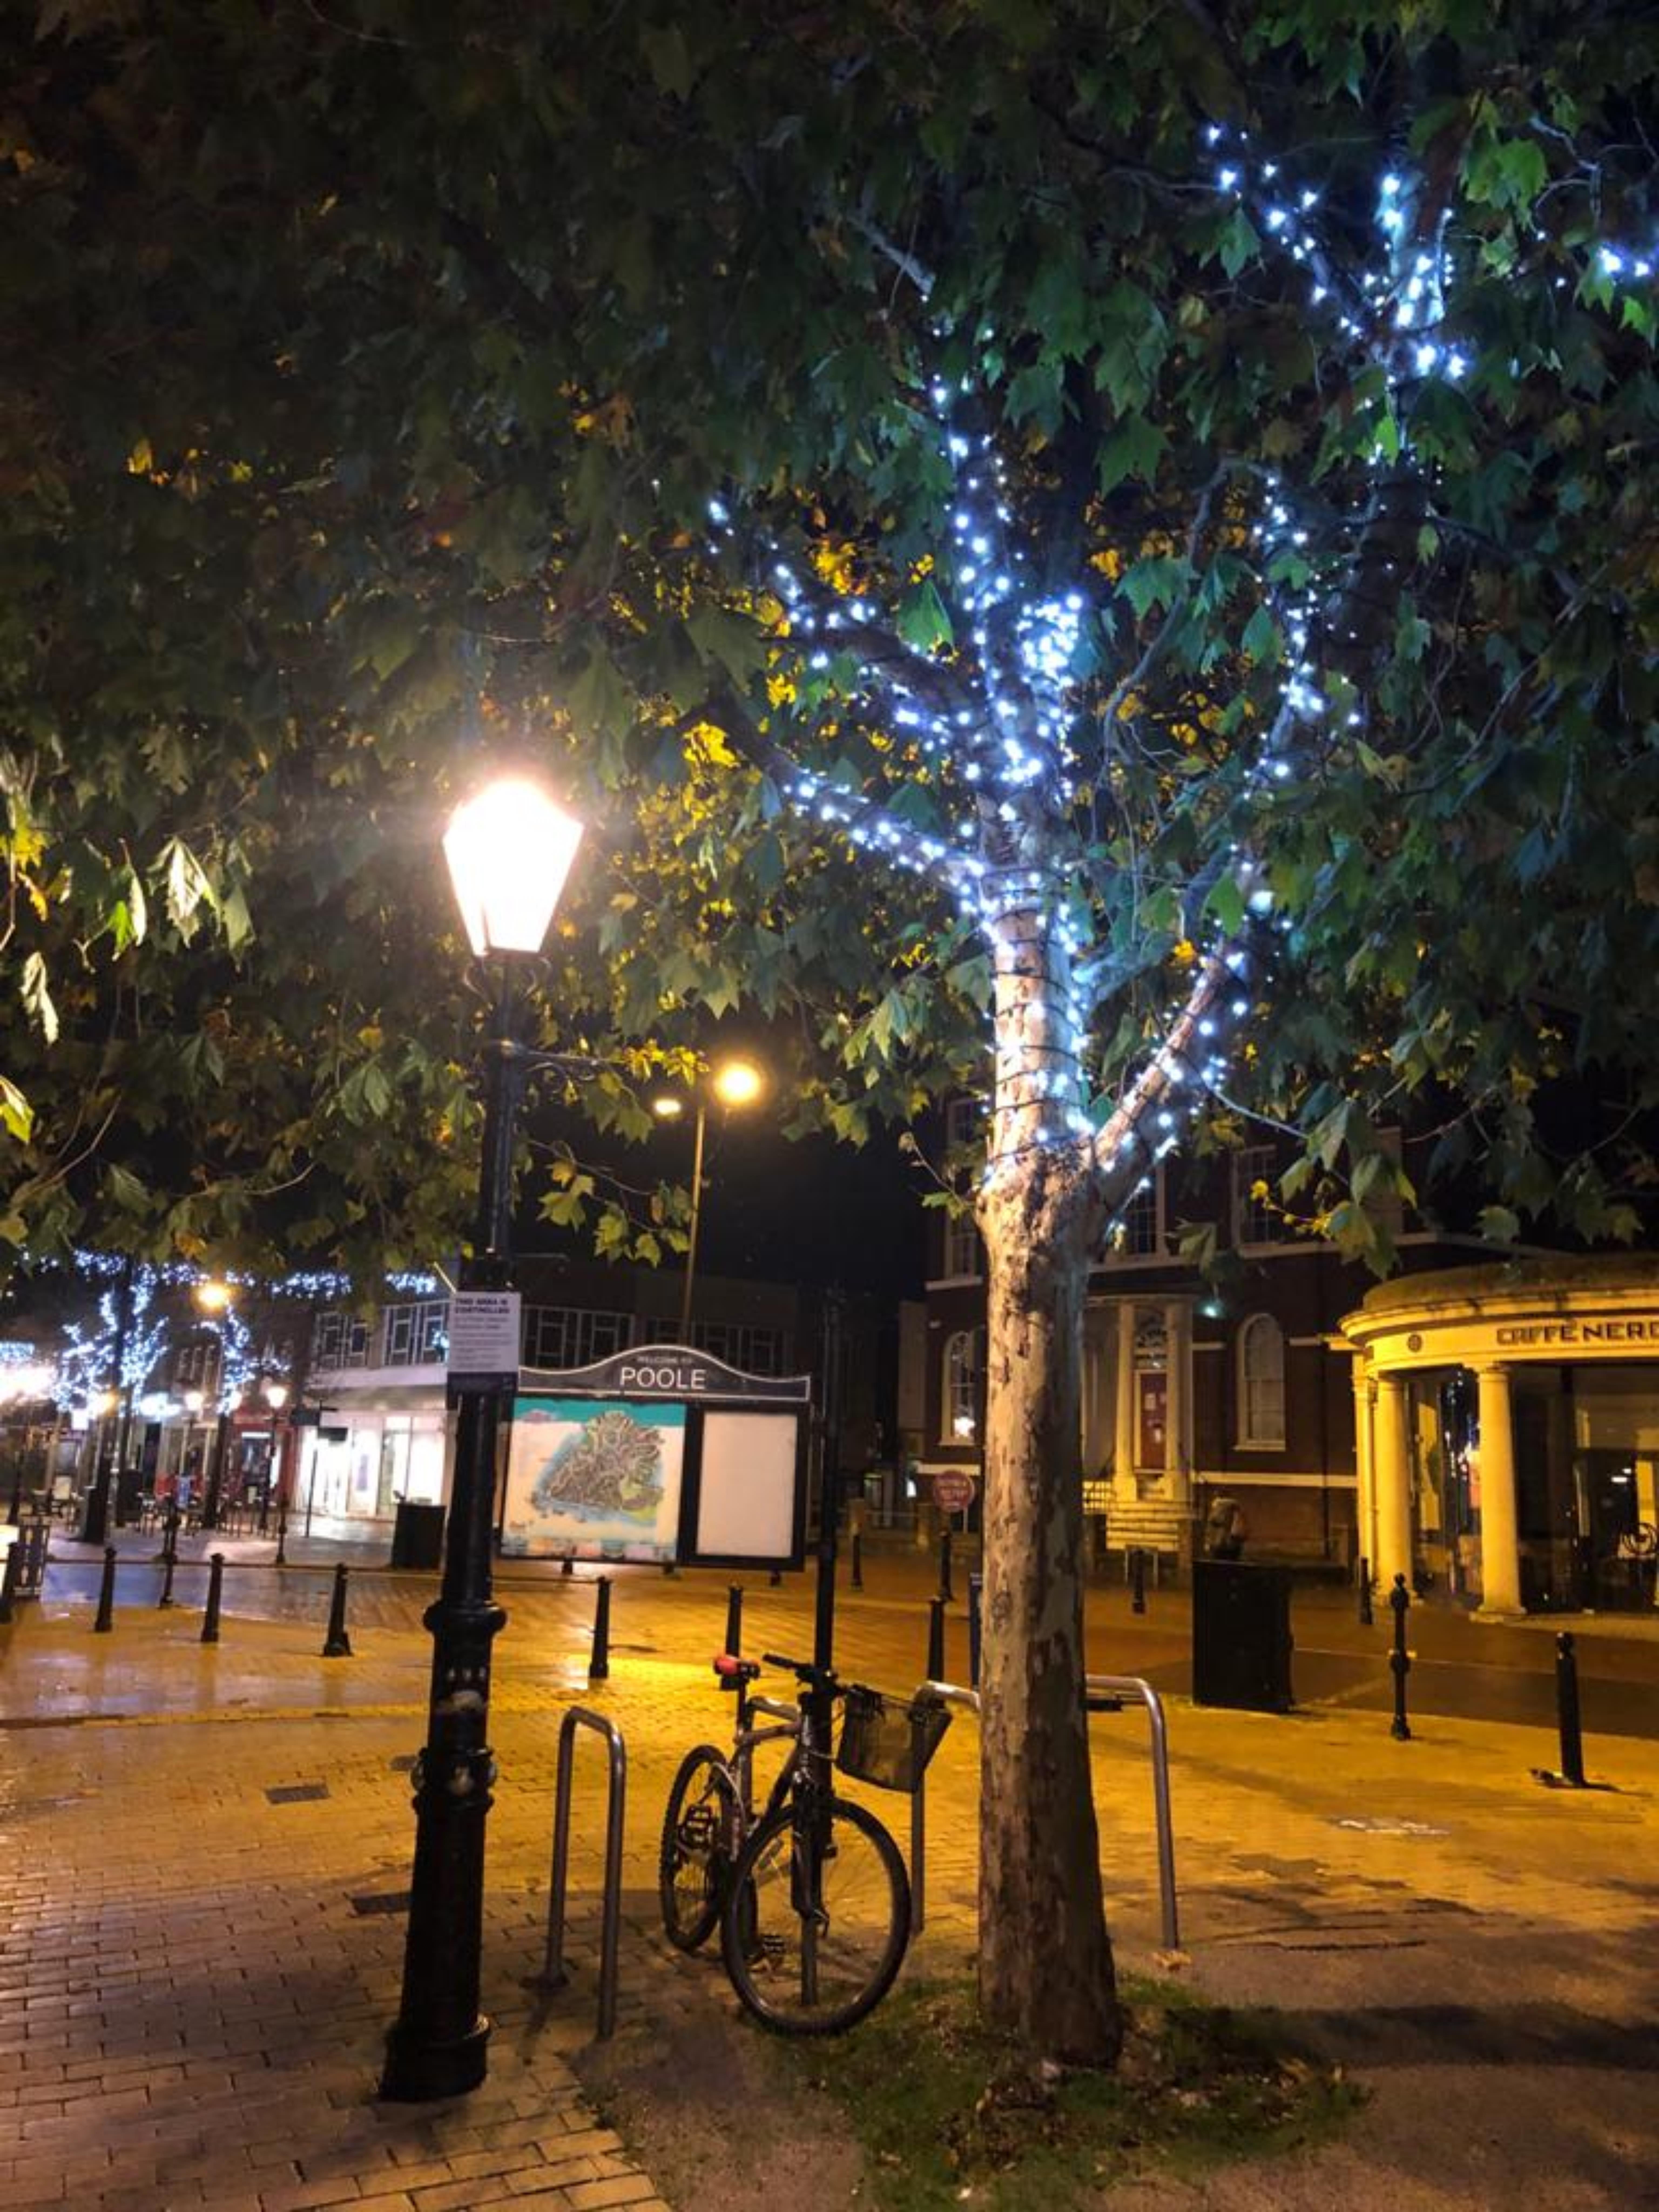 SNAPPED: Poole Christmas Lights 2020